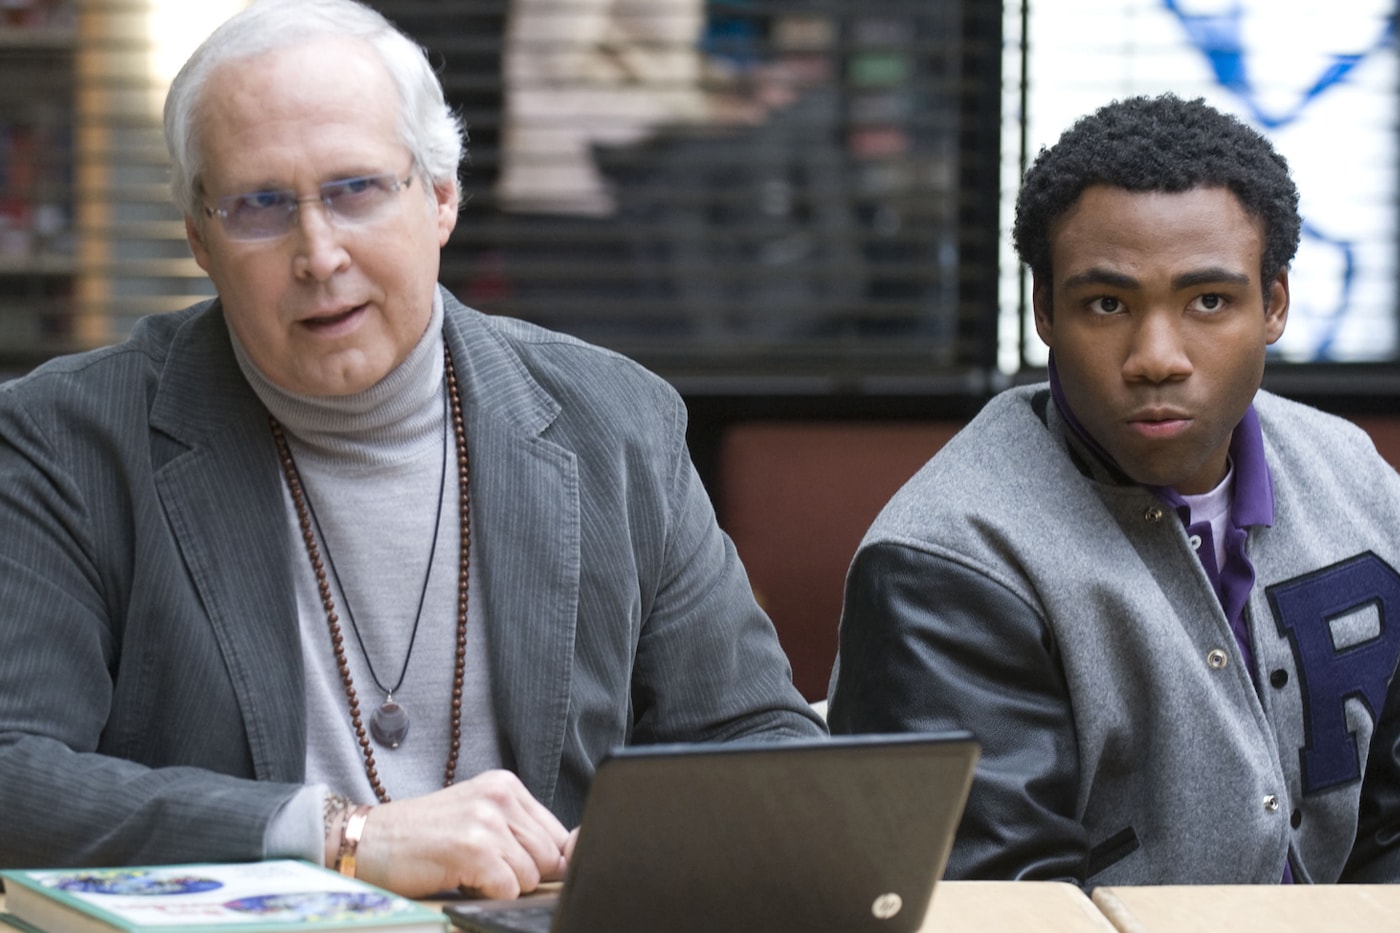 Chevy Chase reveals Why He Left Community not funny hard hitting enough